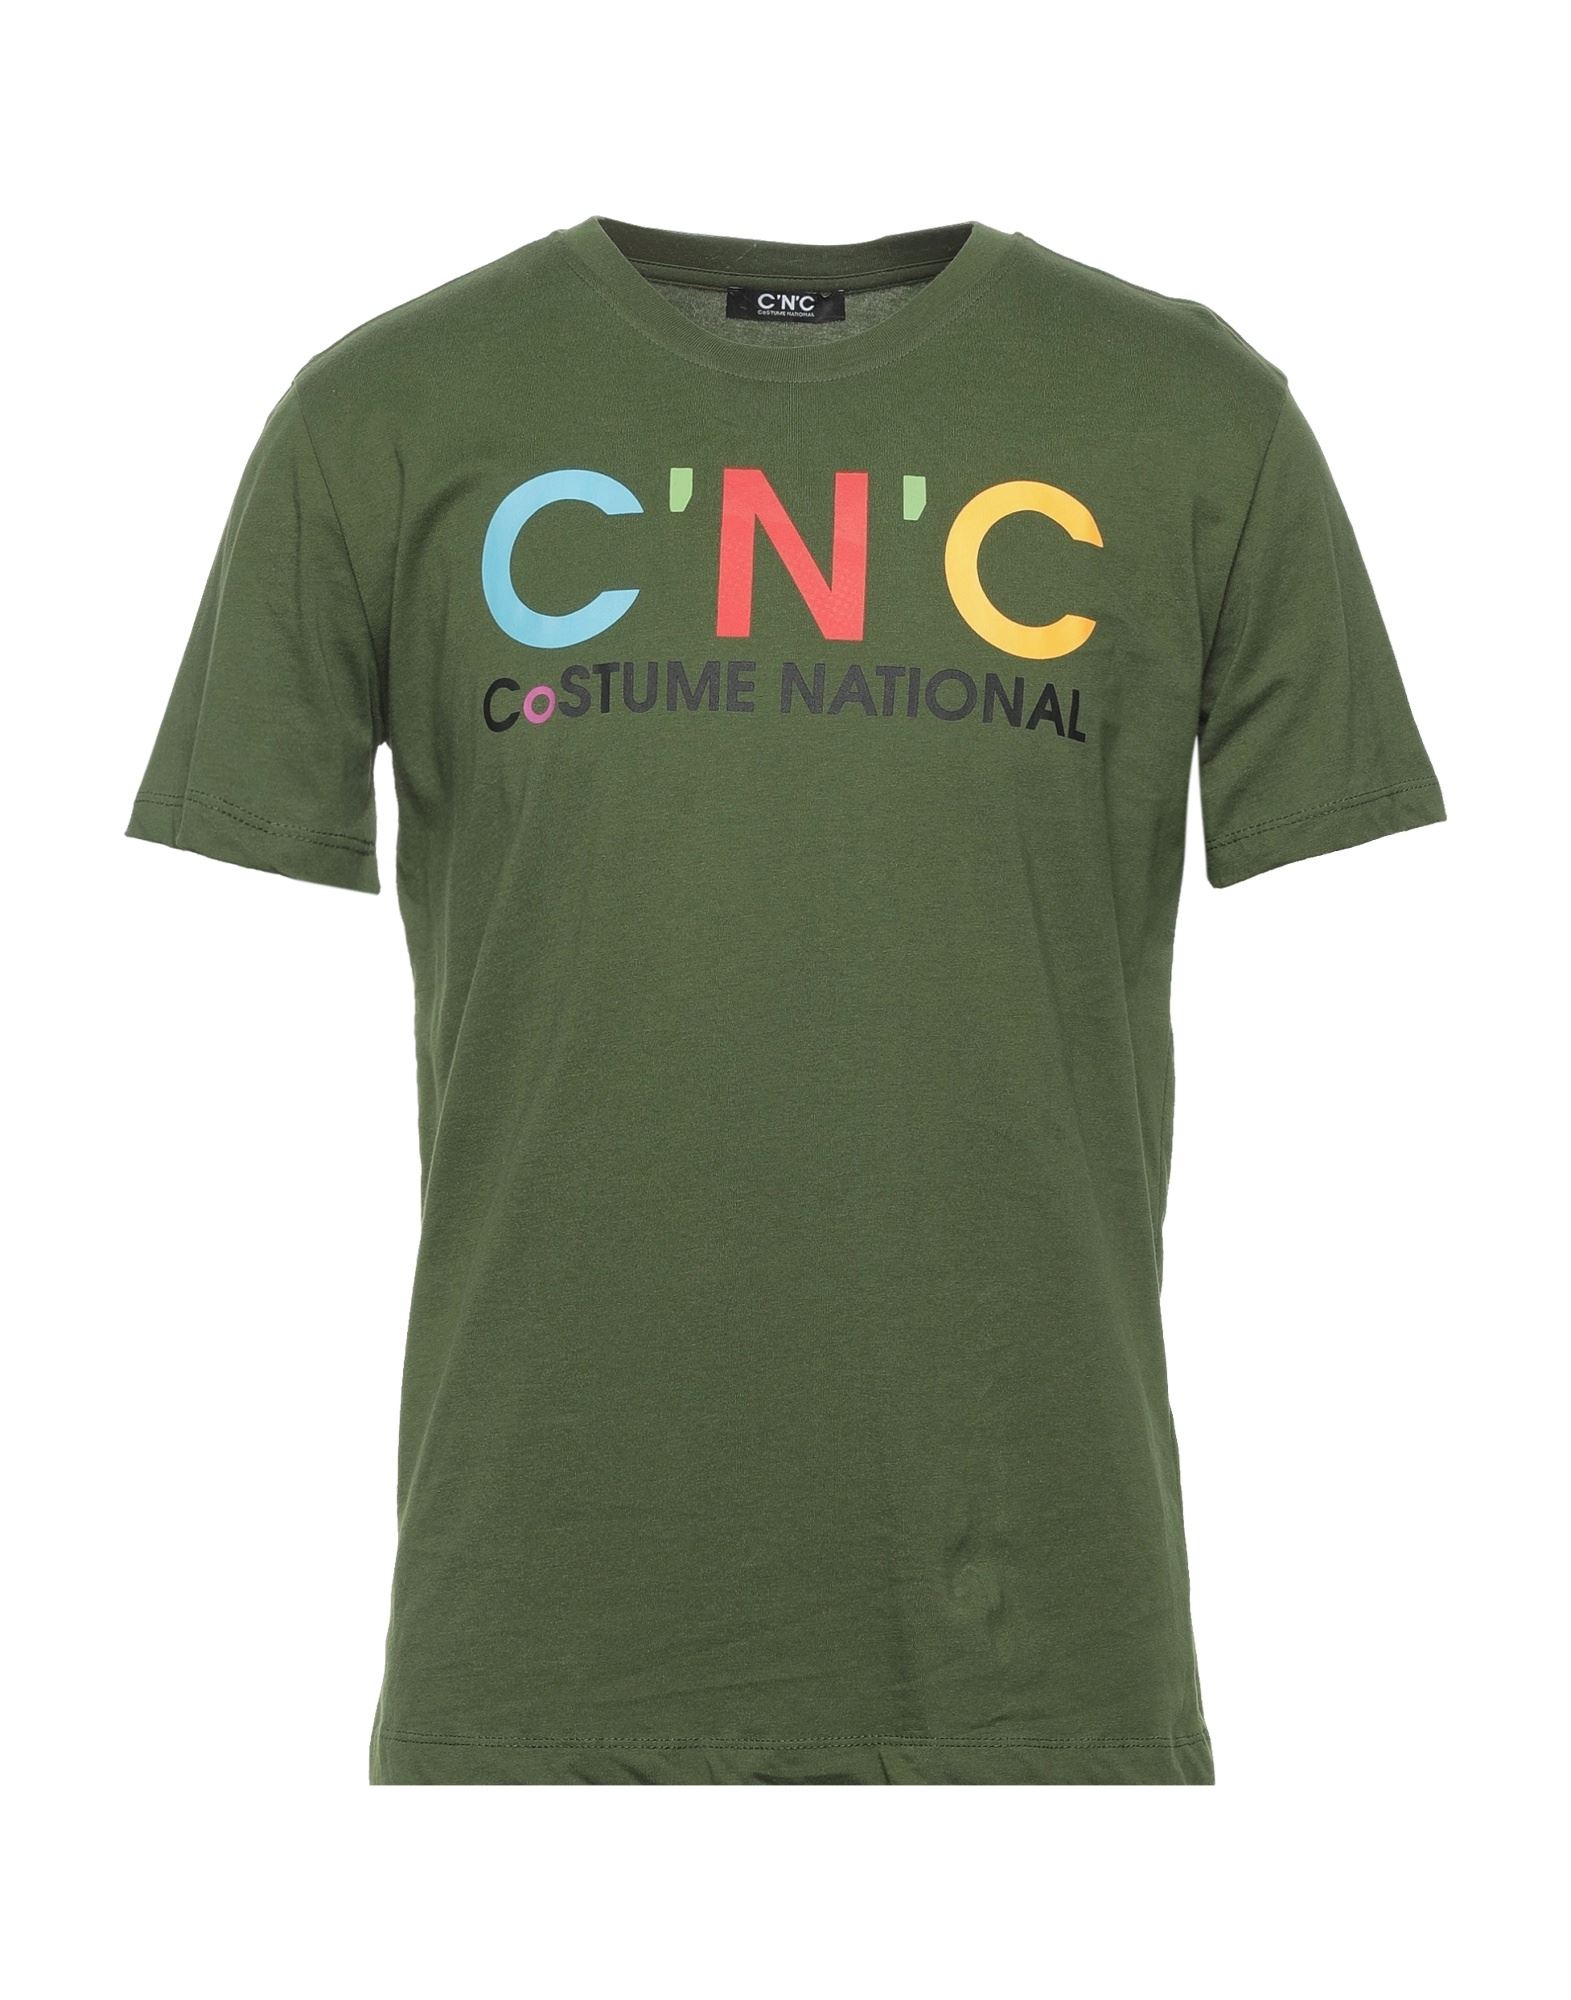 C'n'c' Costume National T-shirts In Olive Green